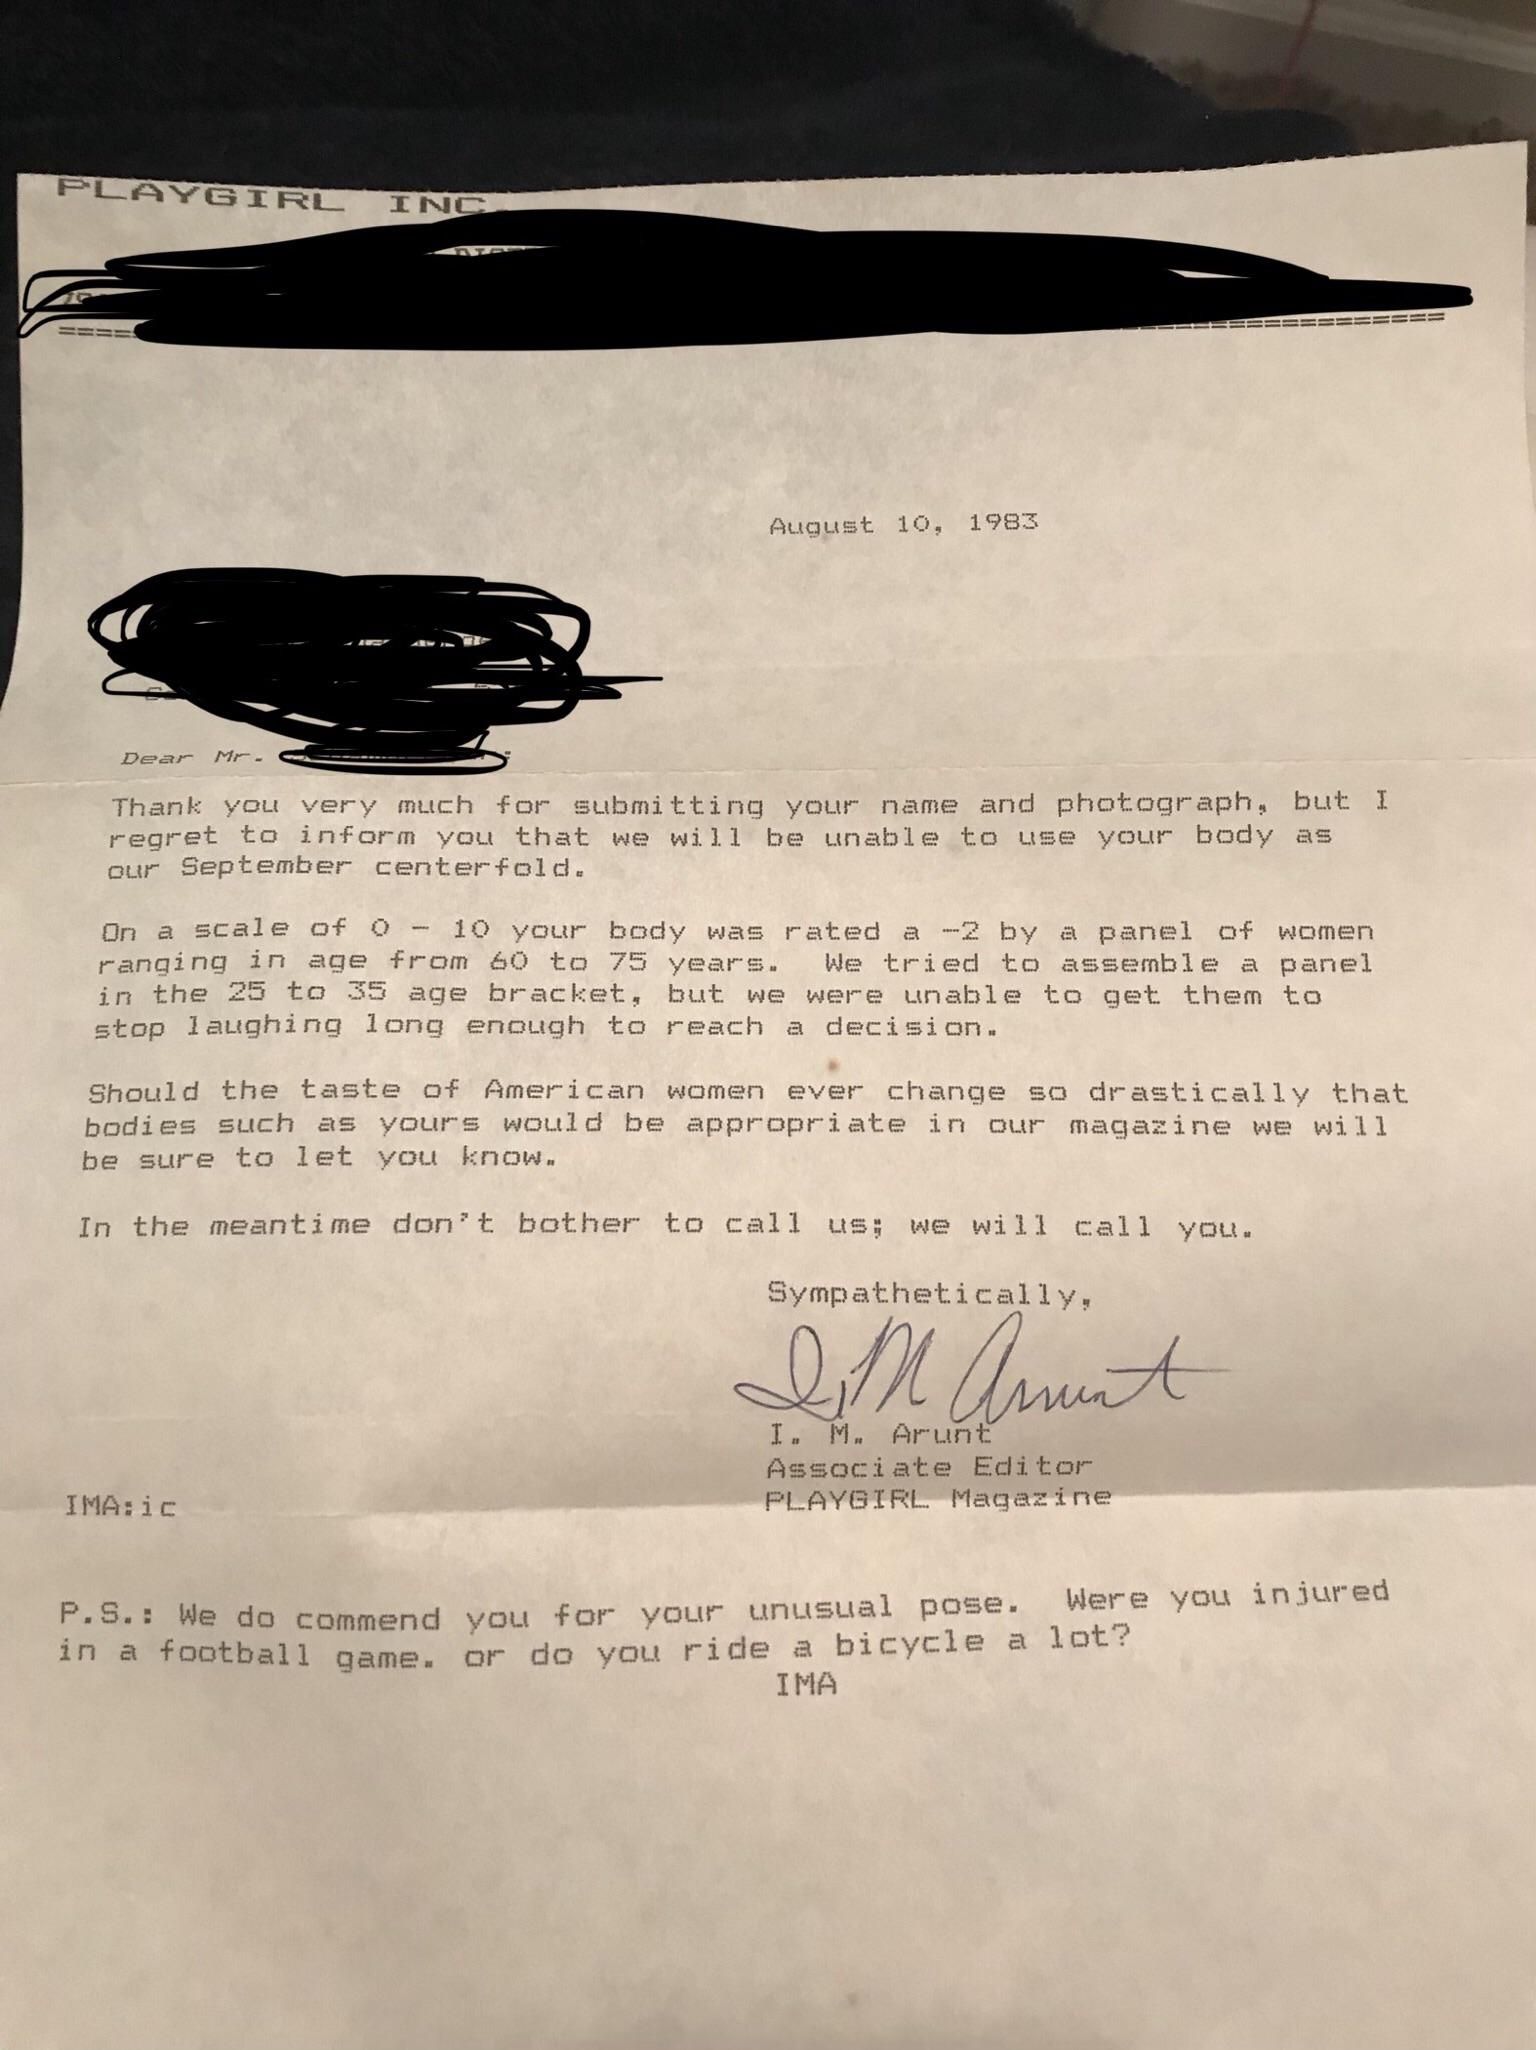 This is a letter my dad received from playgirl magazine when he was in high school.